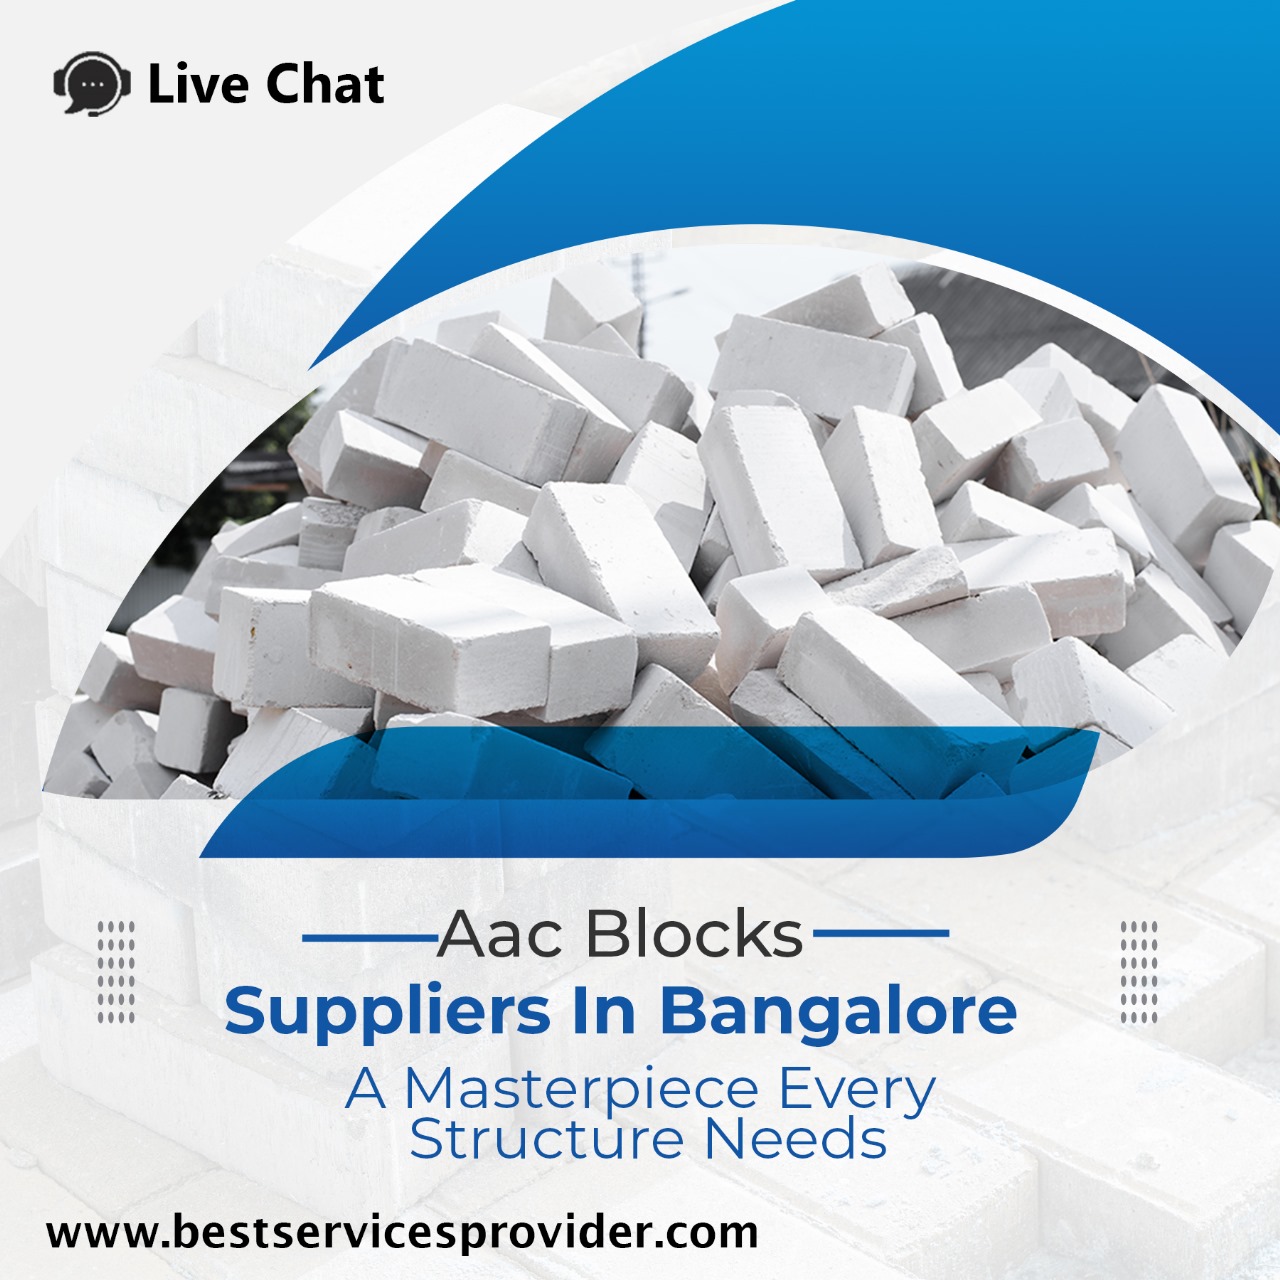 Aac Blocks Suppliers In Bangalore